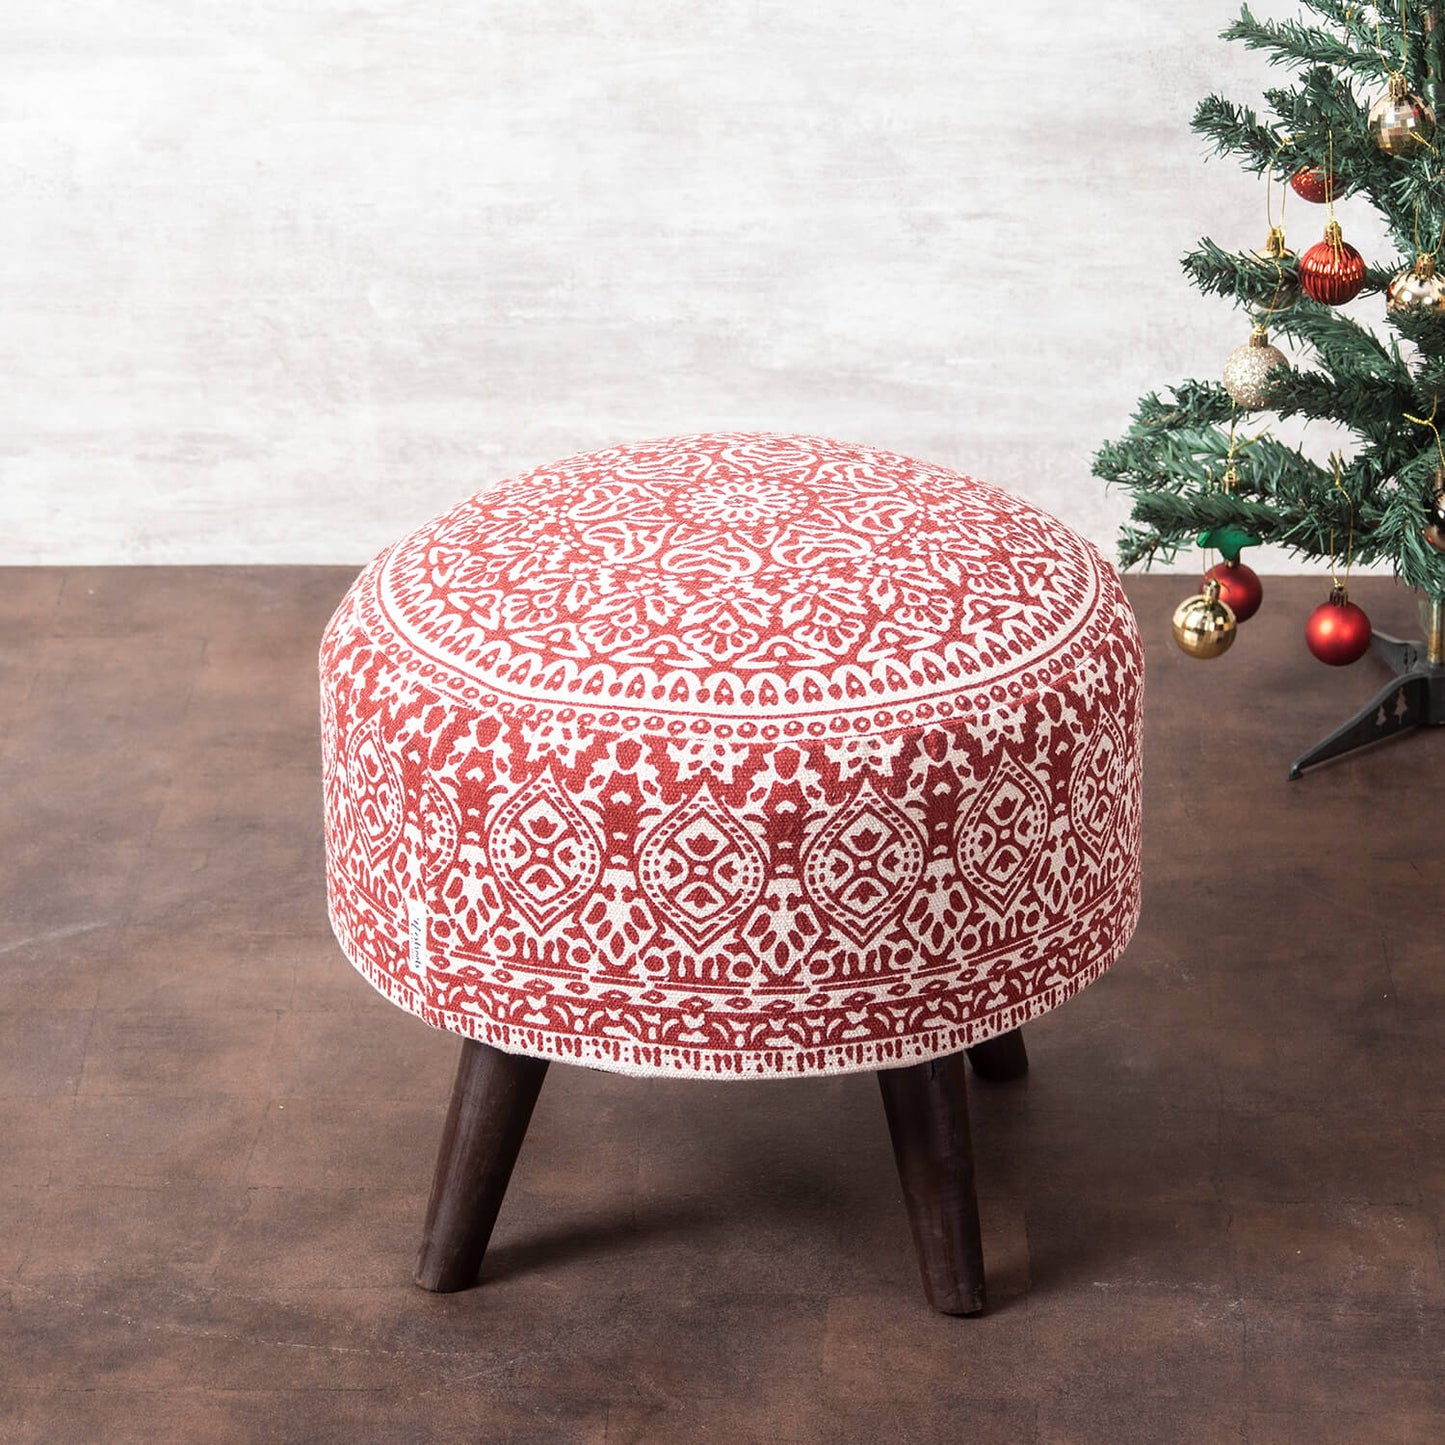 Wooden Ottomans: Classic Imprinted Ottoman (Red)